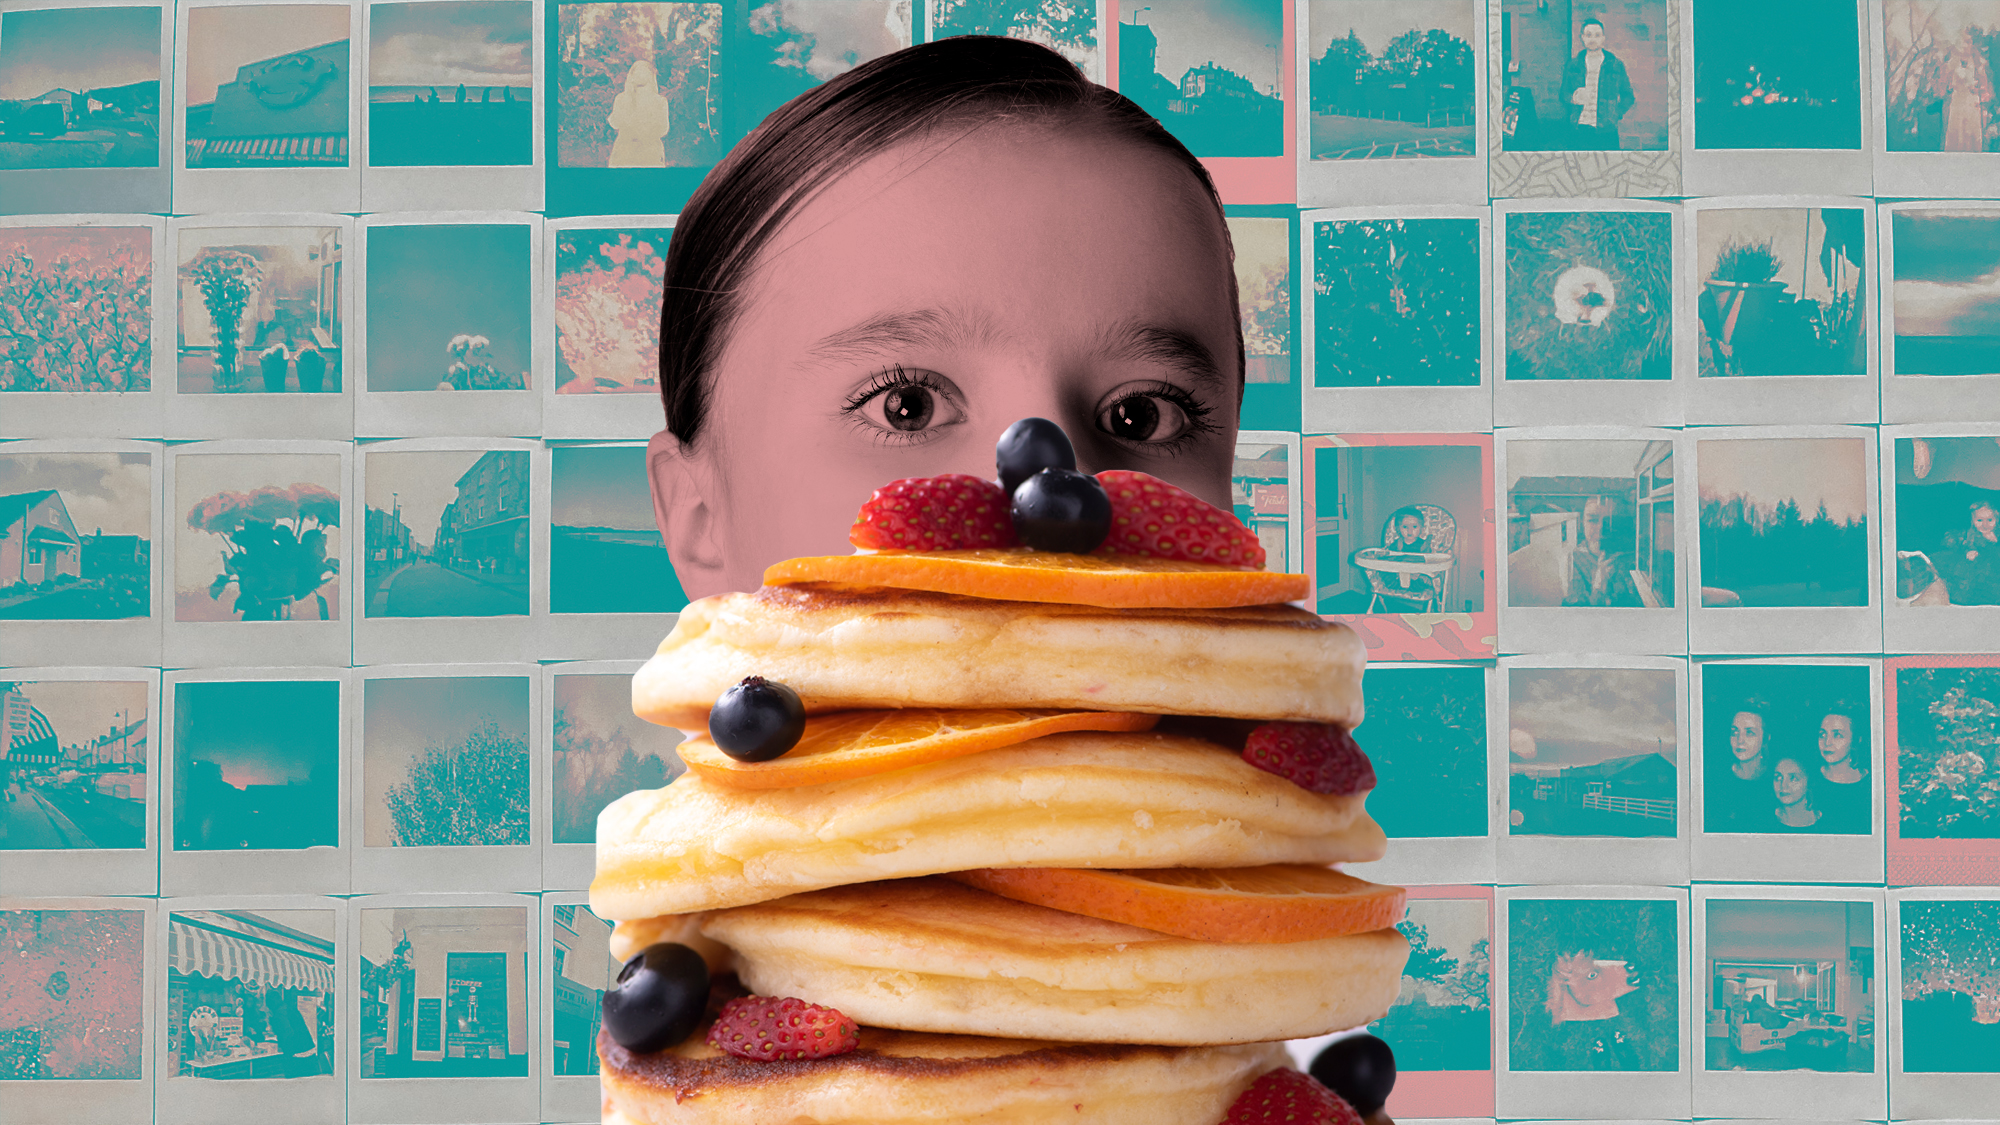 A young child hiding behind a stack of pancakes with syrup and fruit on a background of old polaroids